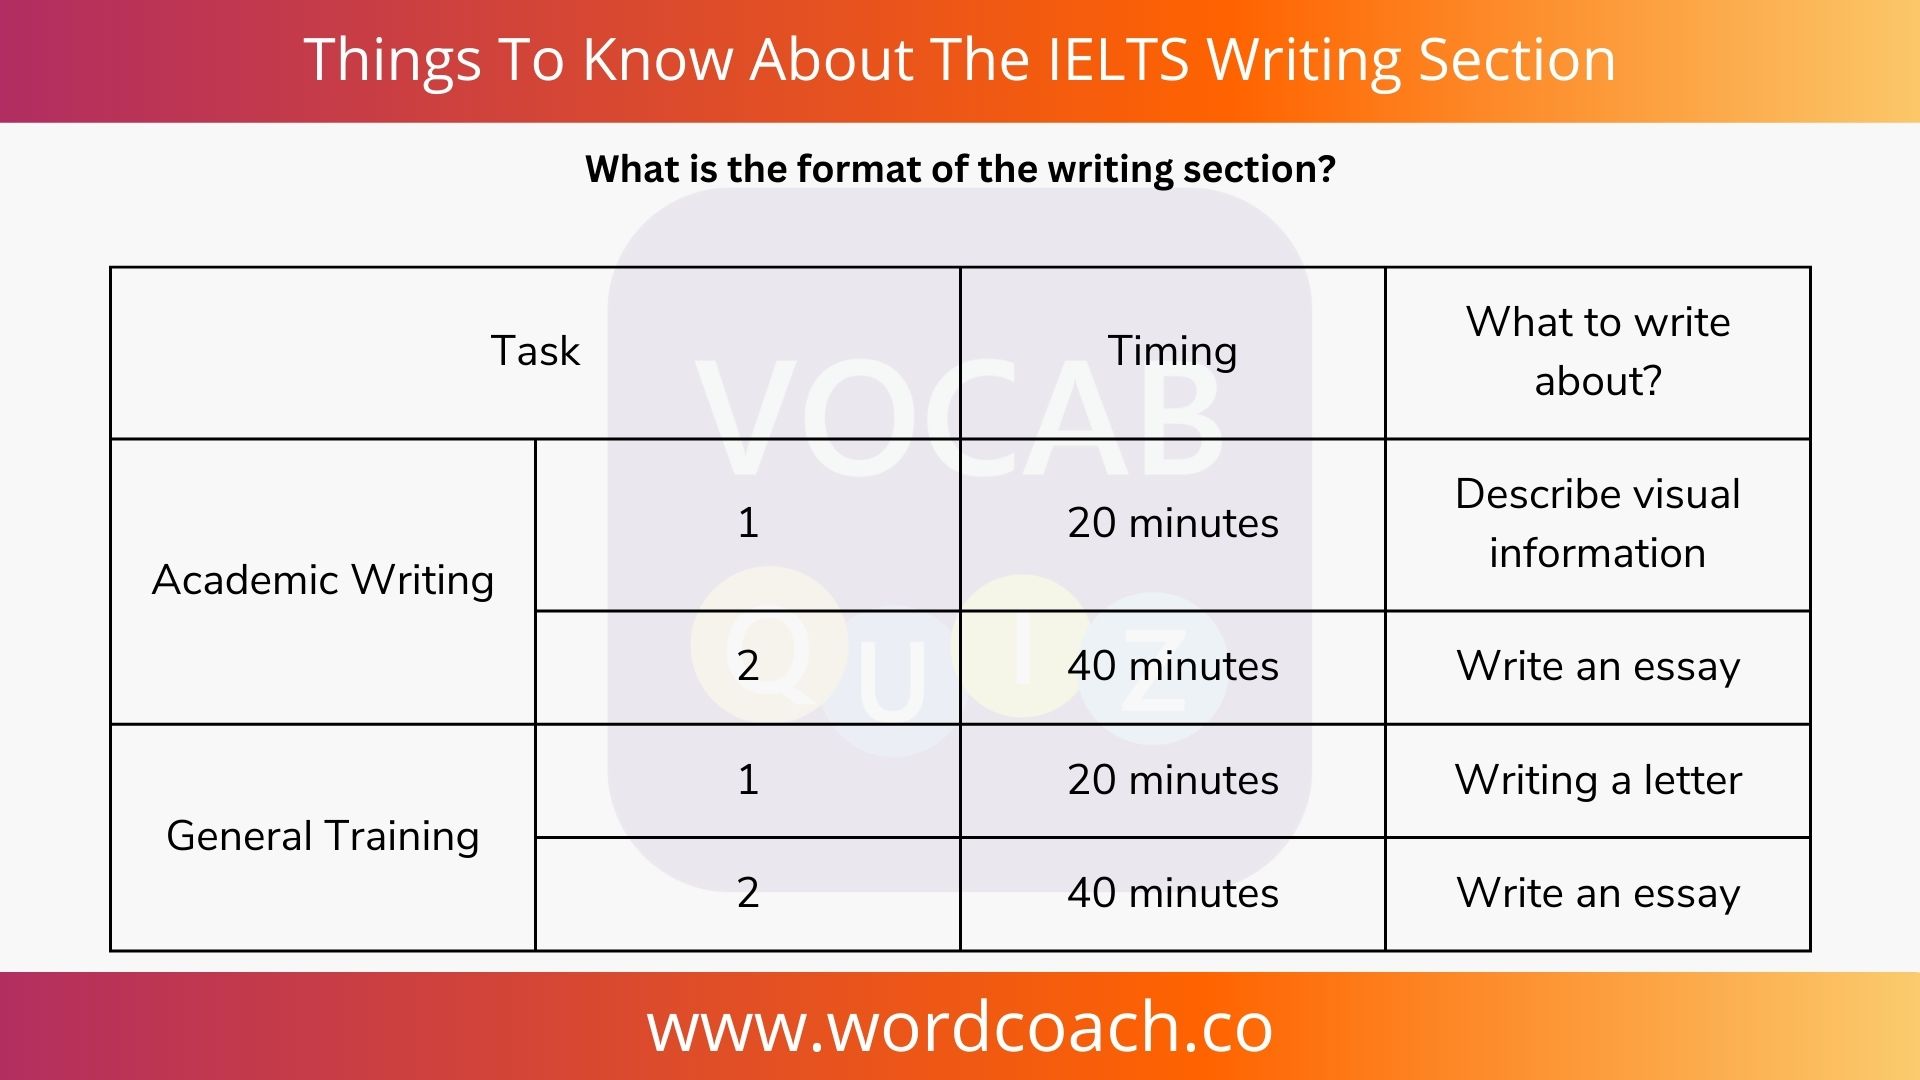 Things To Know About The IELTS Writing Section